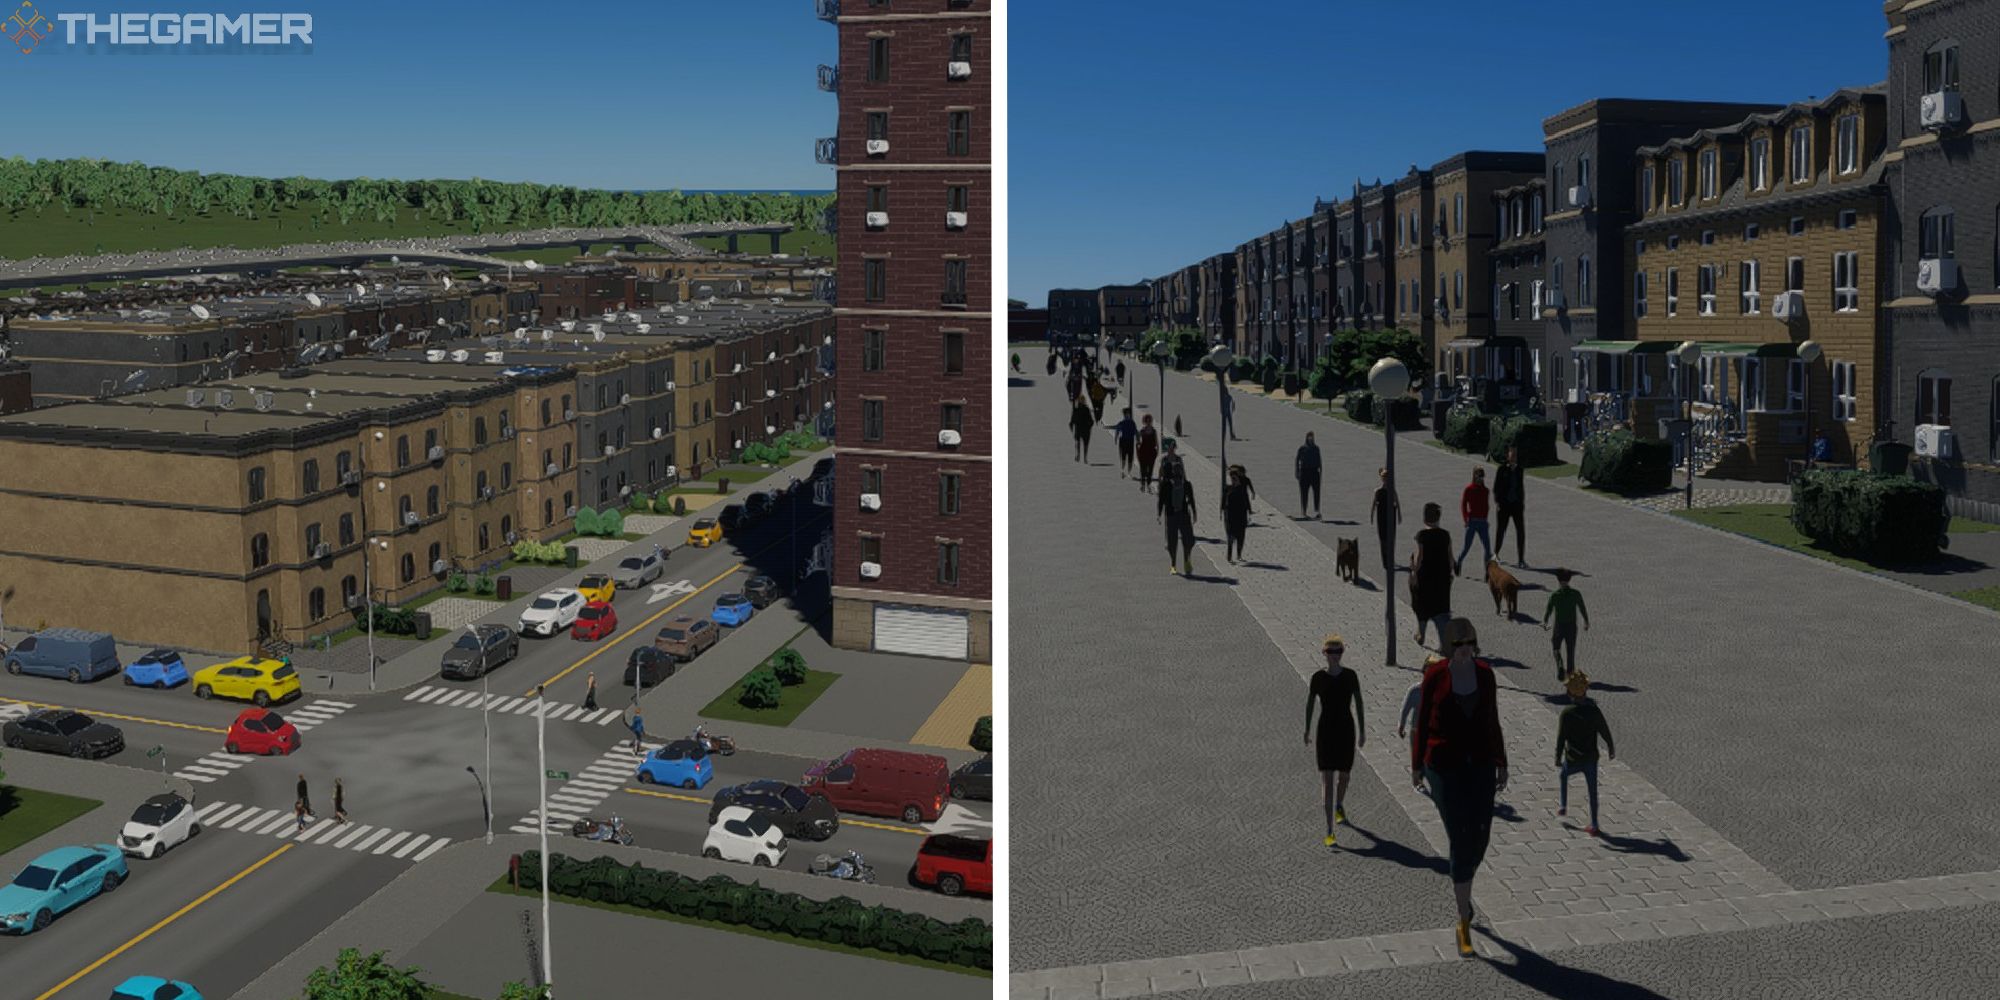 cities skylines 2 split image showing intersection with cars parked next to image of pedestrian street